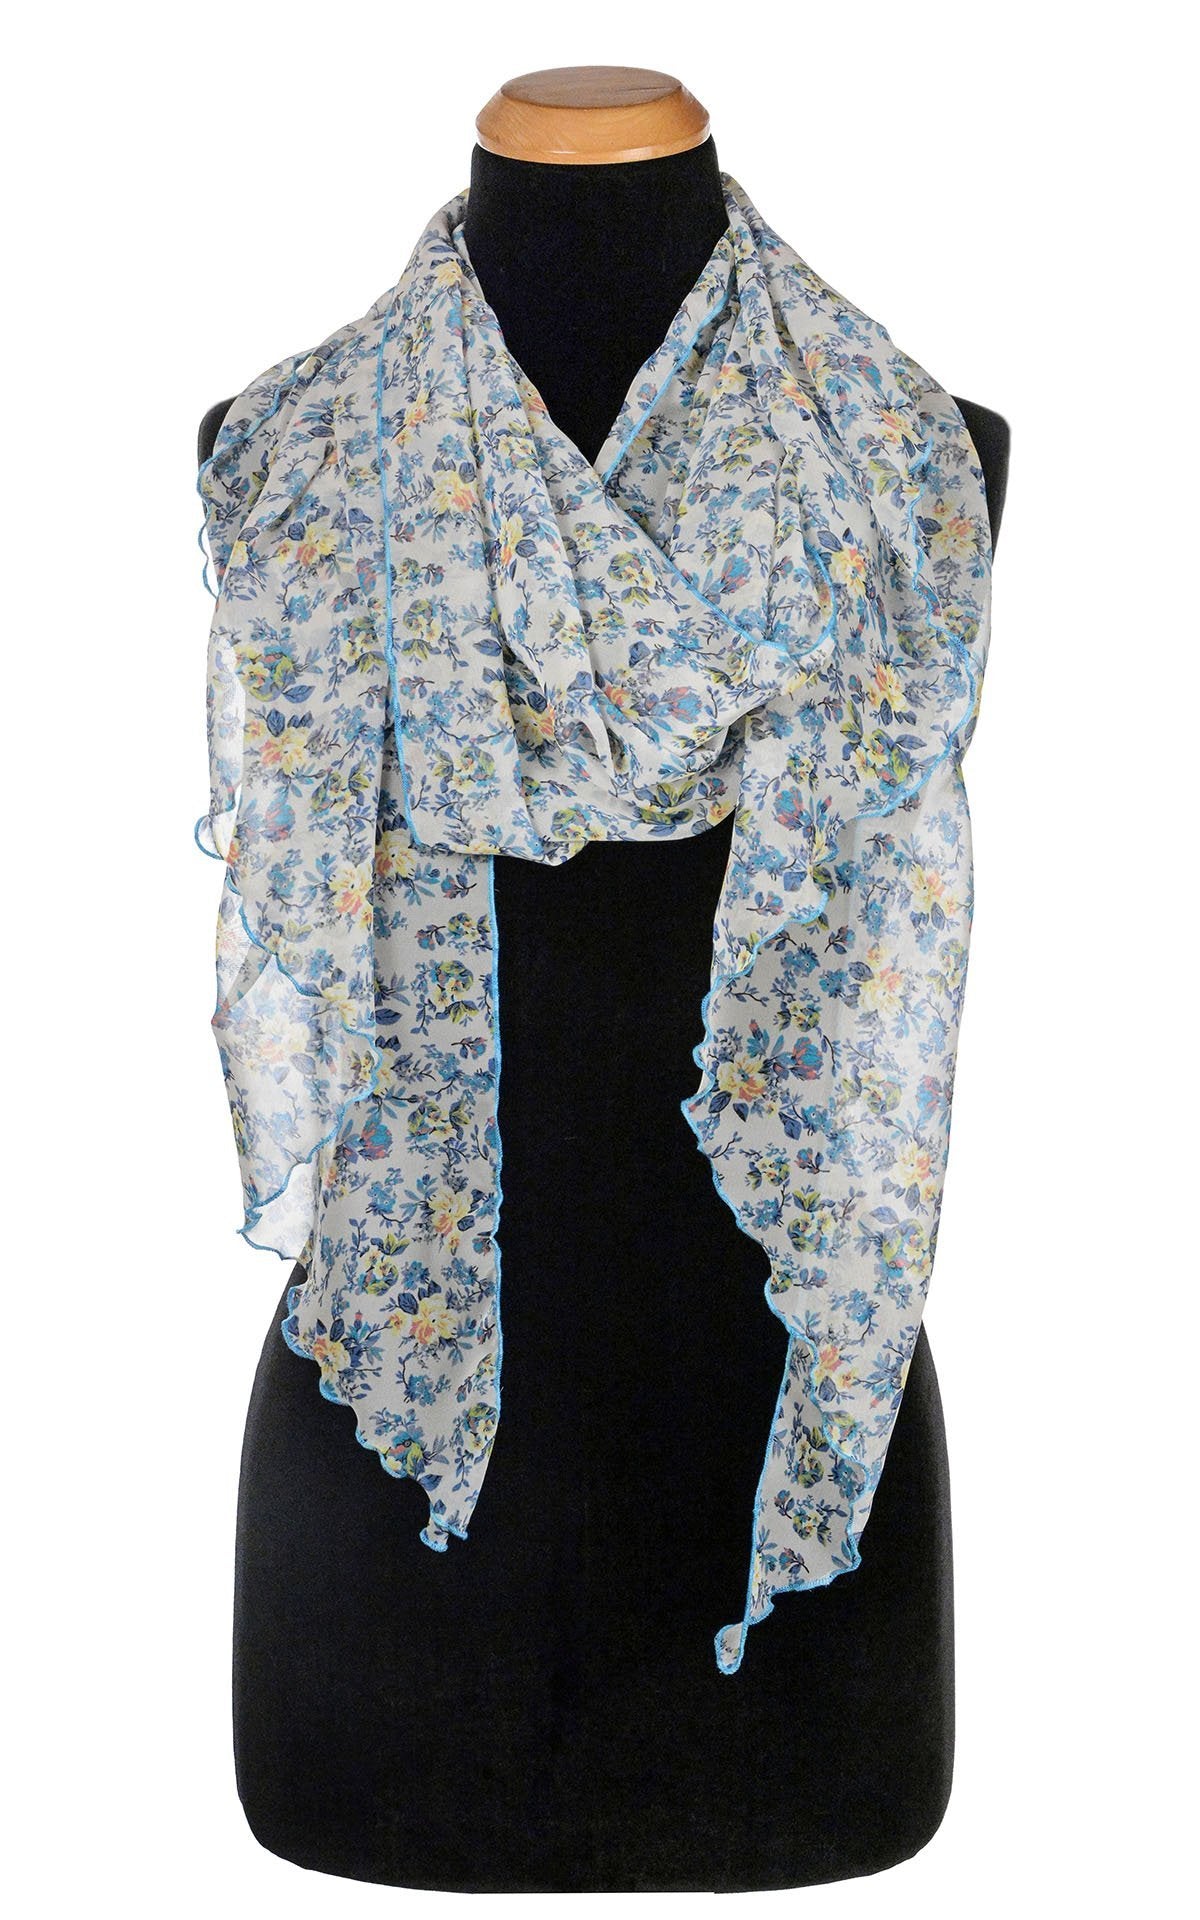 Women’s Large Handkerchief Scarf, Wrap on Mannequin | Victory Garden Chiffon floral print in blues and ivory| Handmade in Seattle WA | Pandemonium Millinery